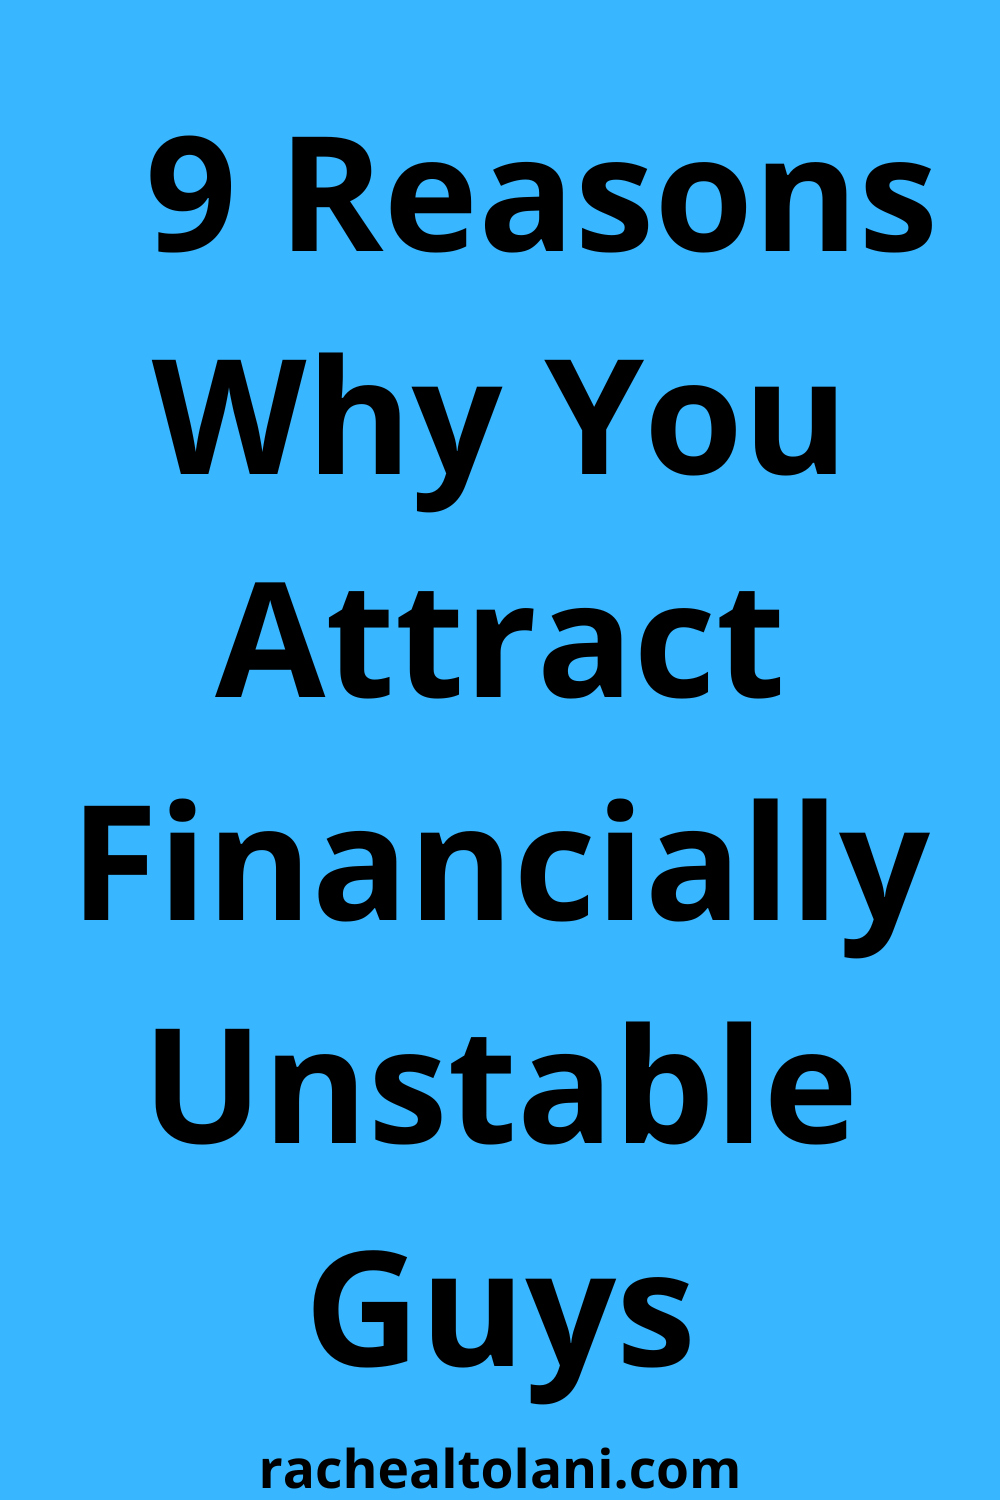 Why You Attract Financially Unstable Guys